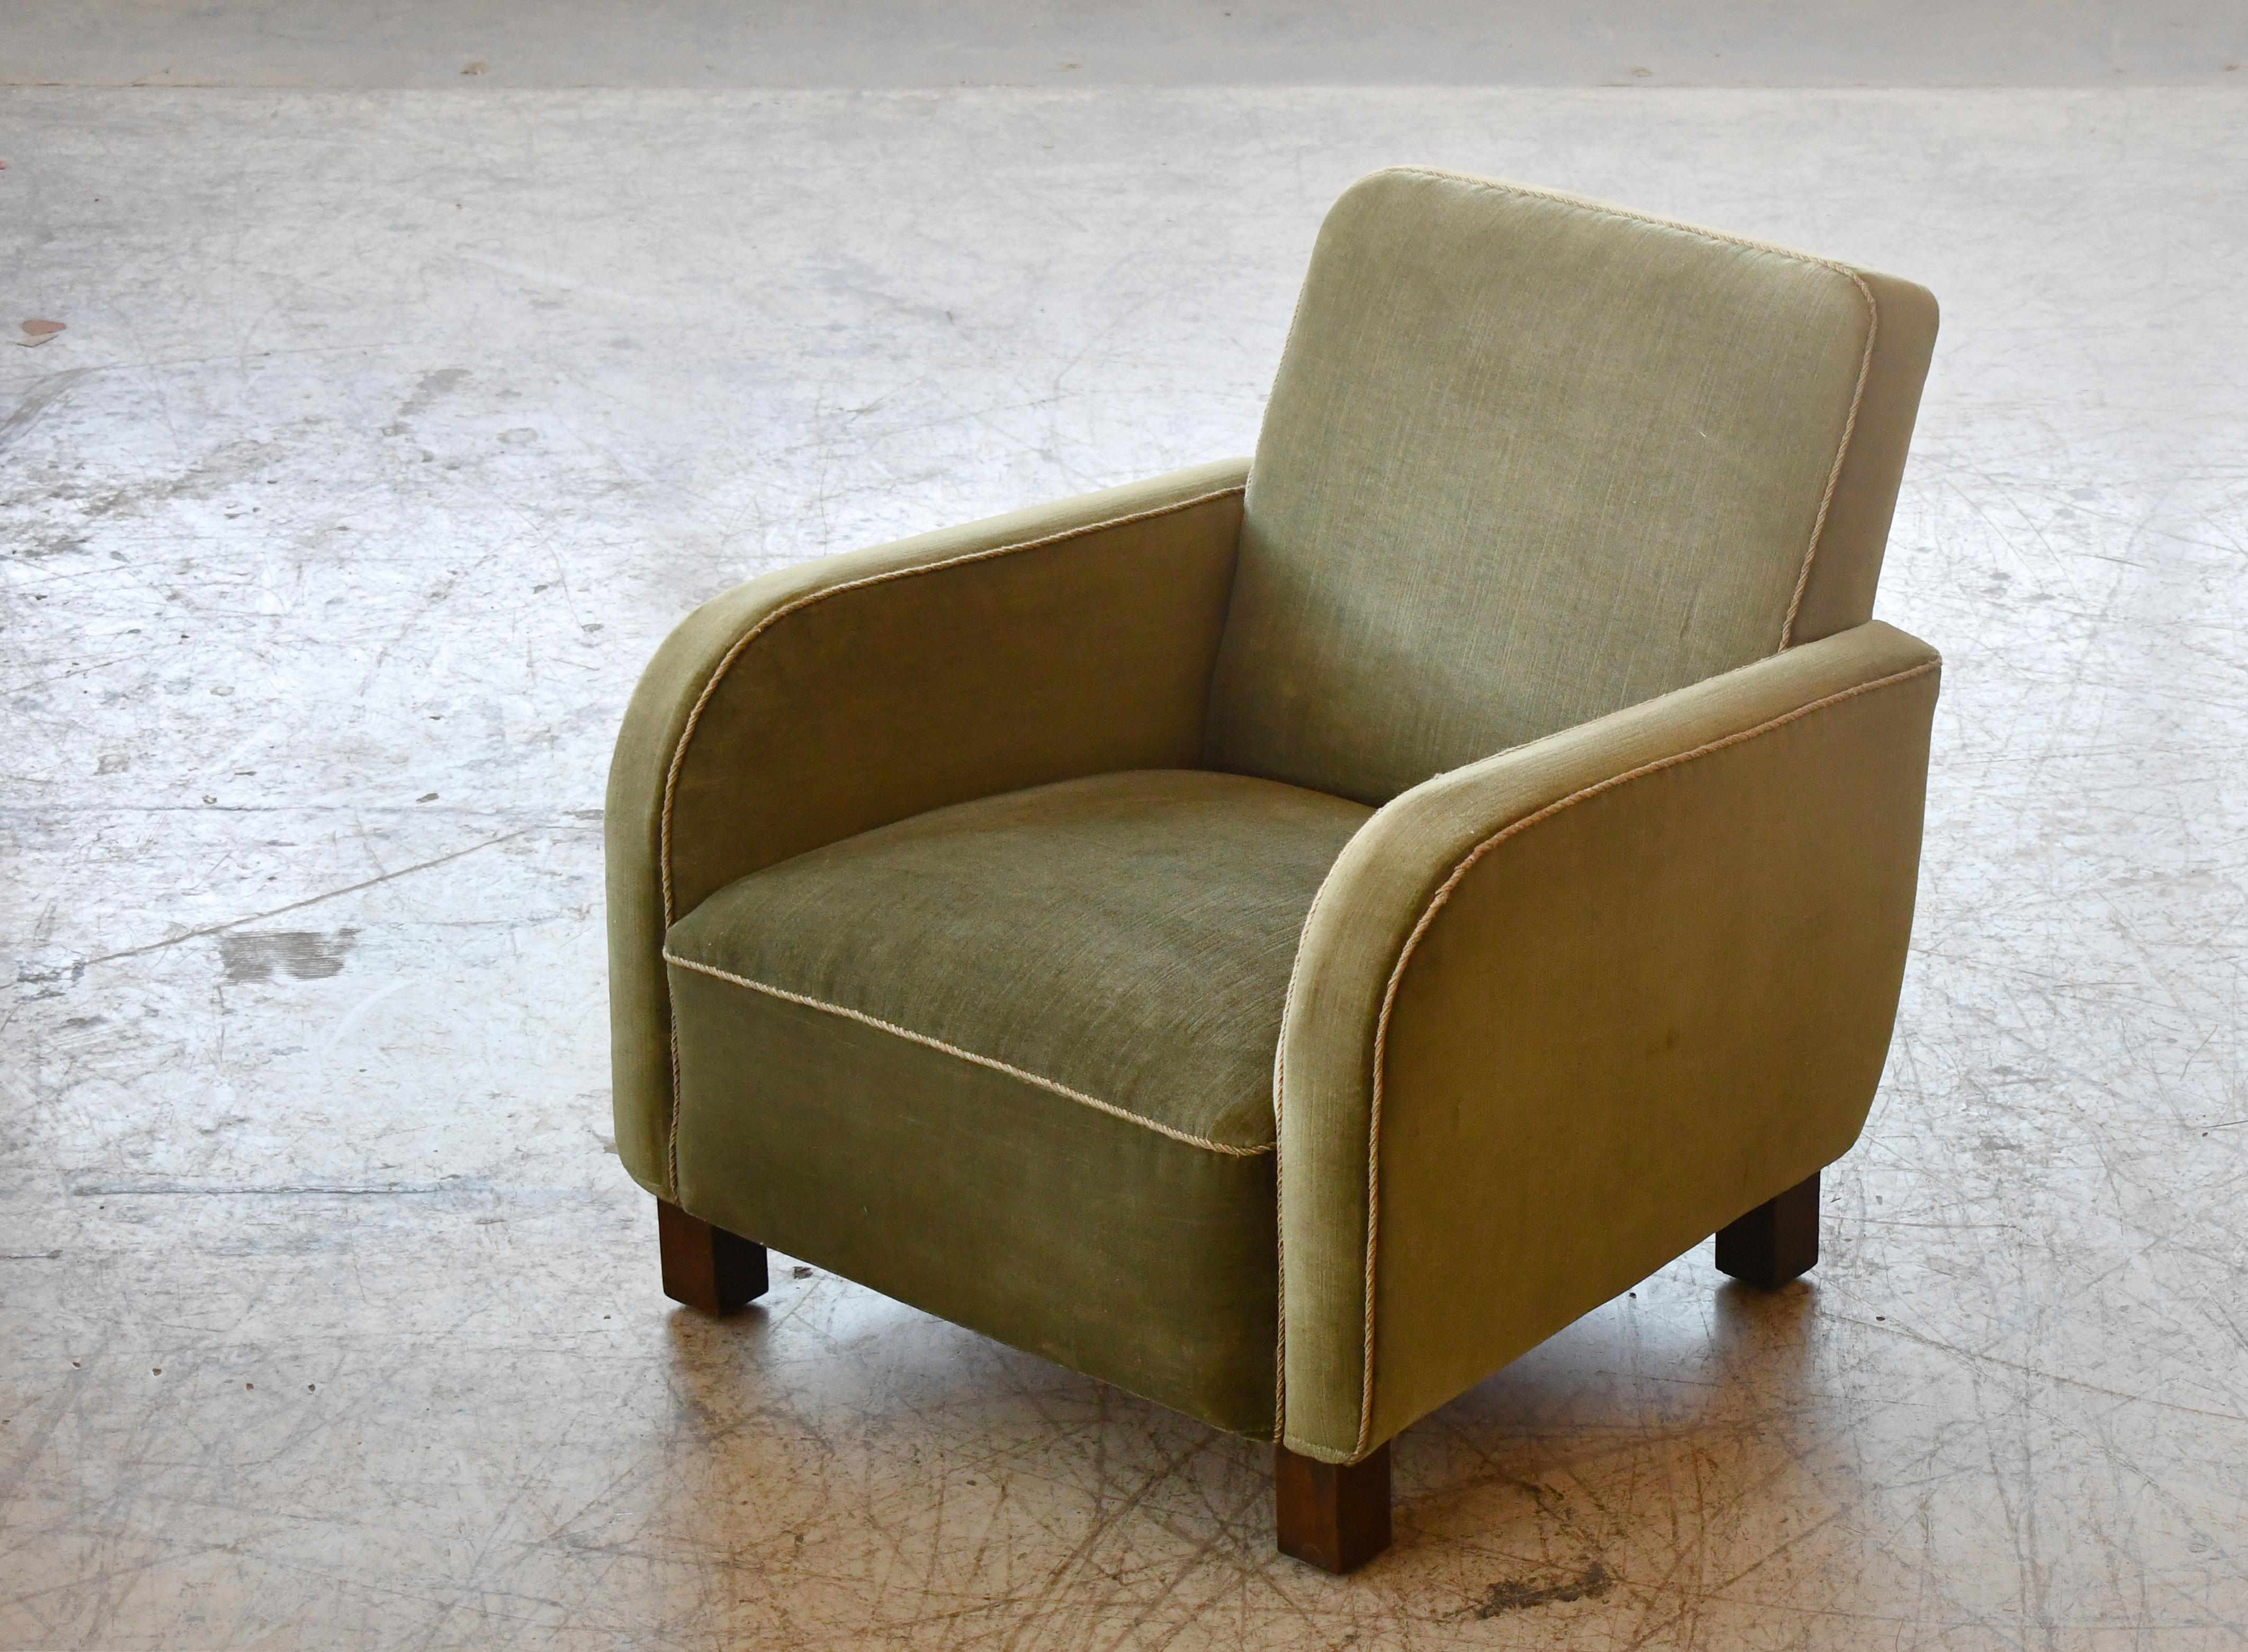 1930-40s Danish Art Deco or Early Midcentury Lounge Chair in Green Mohair In Good Condition For Sale In Bridgeport, CT